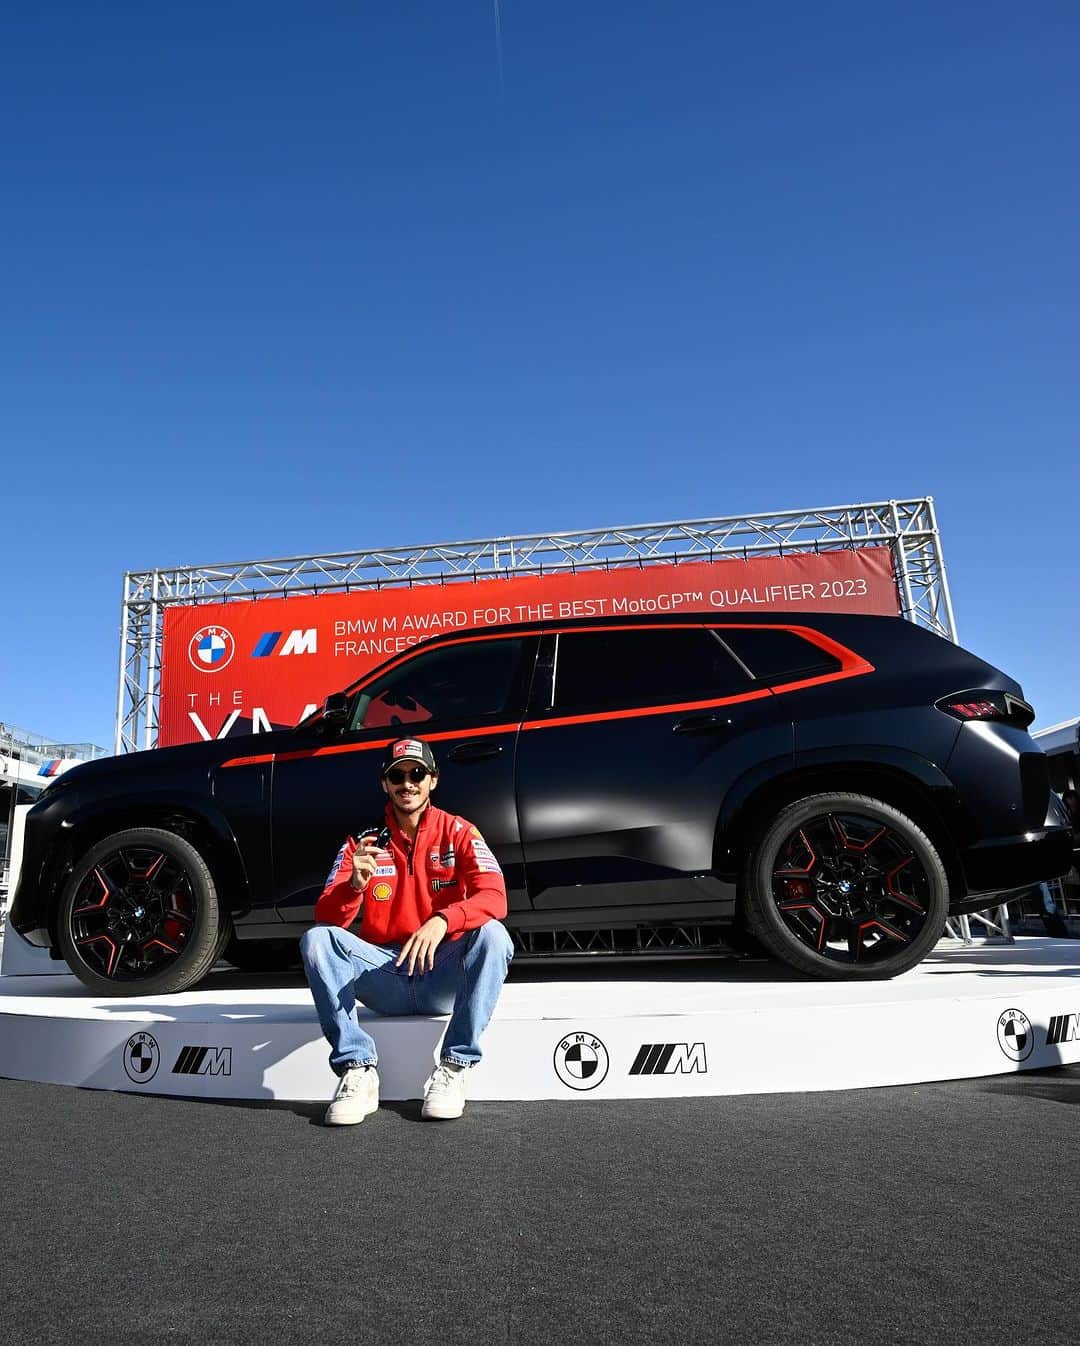 MotoGPのインスタグラム：「@pecco63 is not only the 2023 #MotoGP World Champion, but also the best qualifier of the season! ⏱️ And here's the moment he received the keys of his brand new @bmwm car! 🤩  #ValenciaGP 🏁 #Motorsport #Racing」